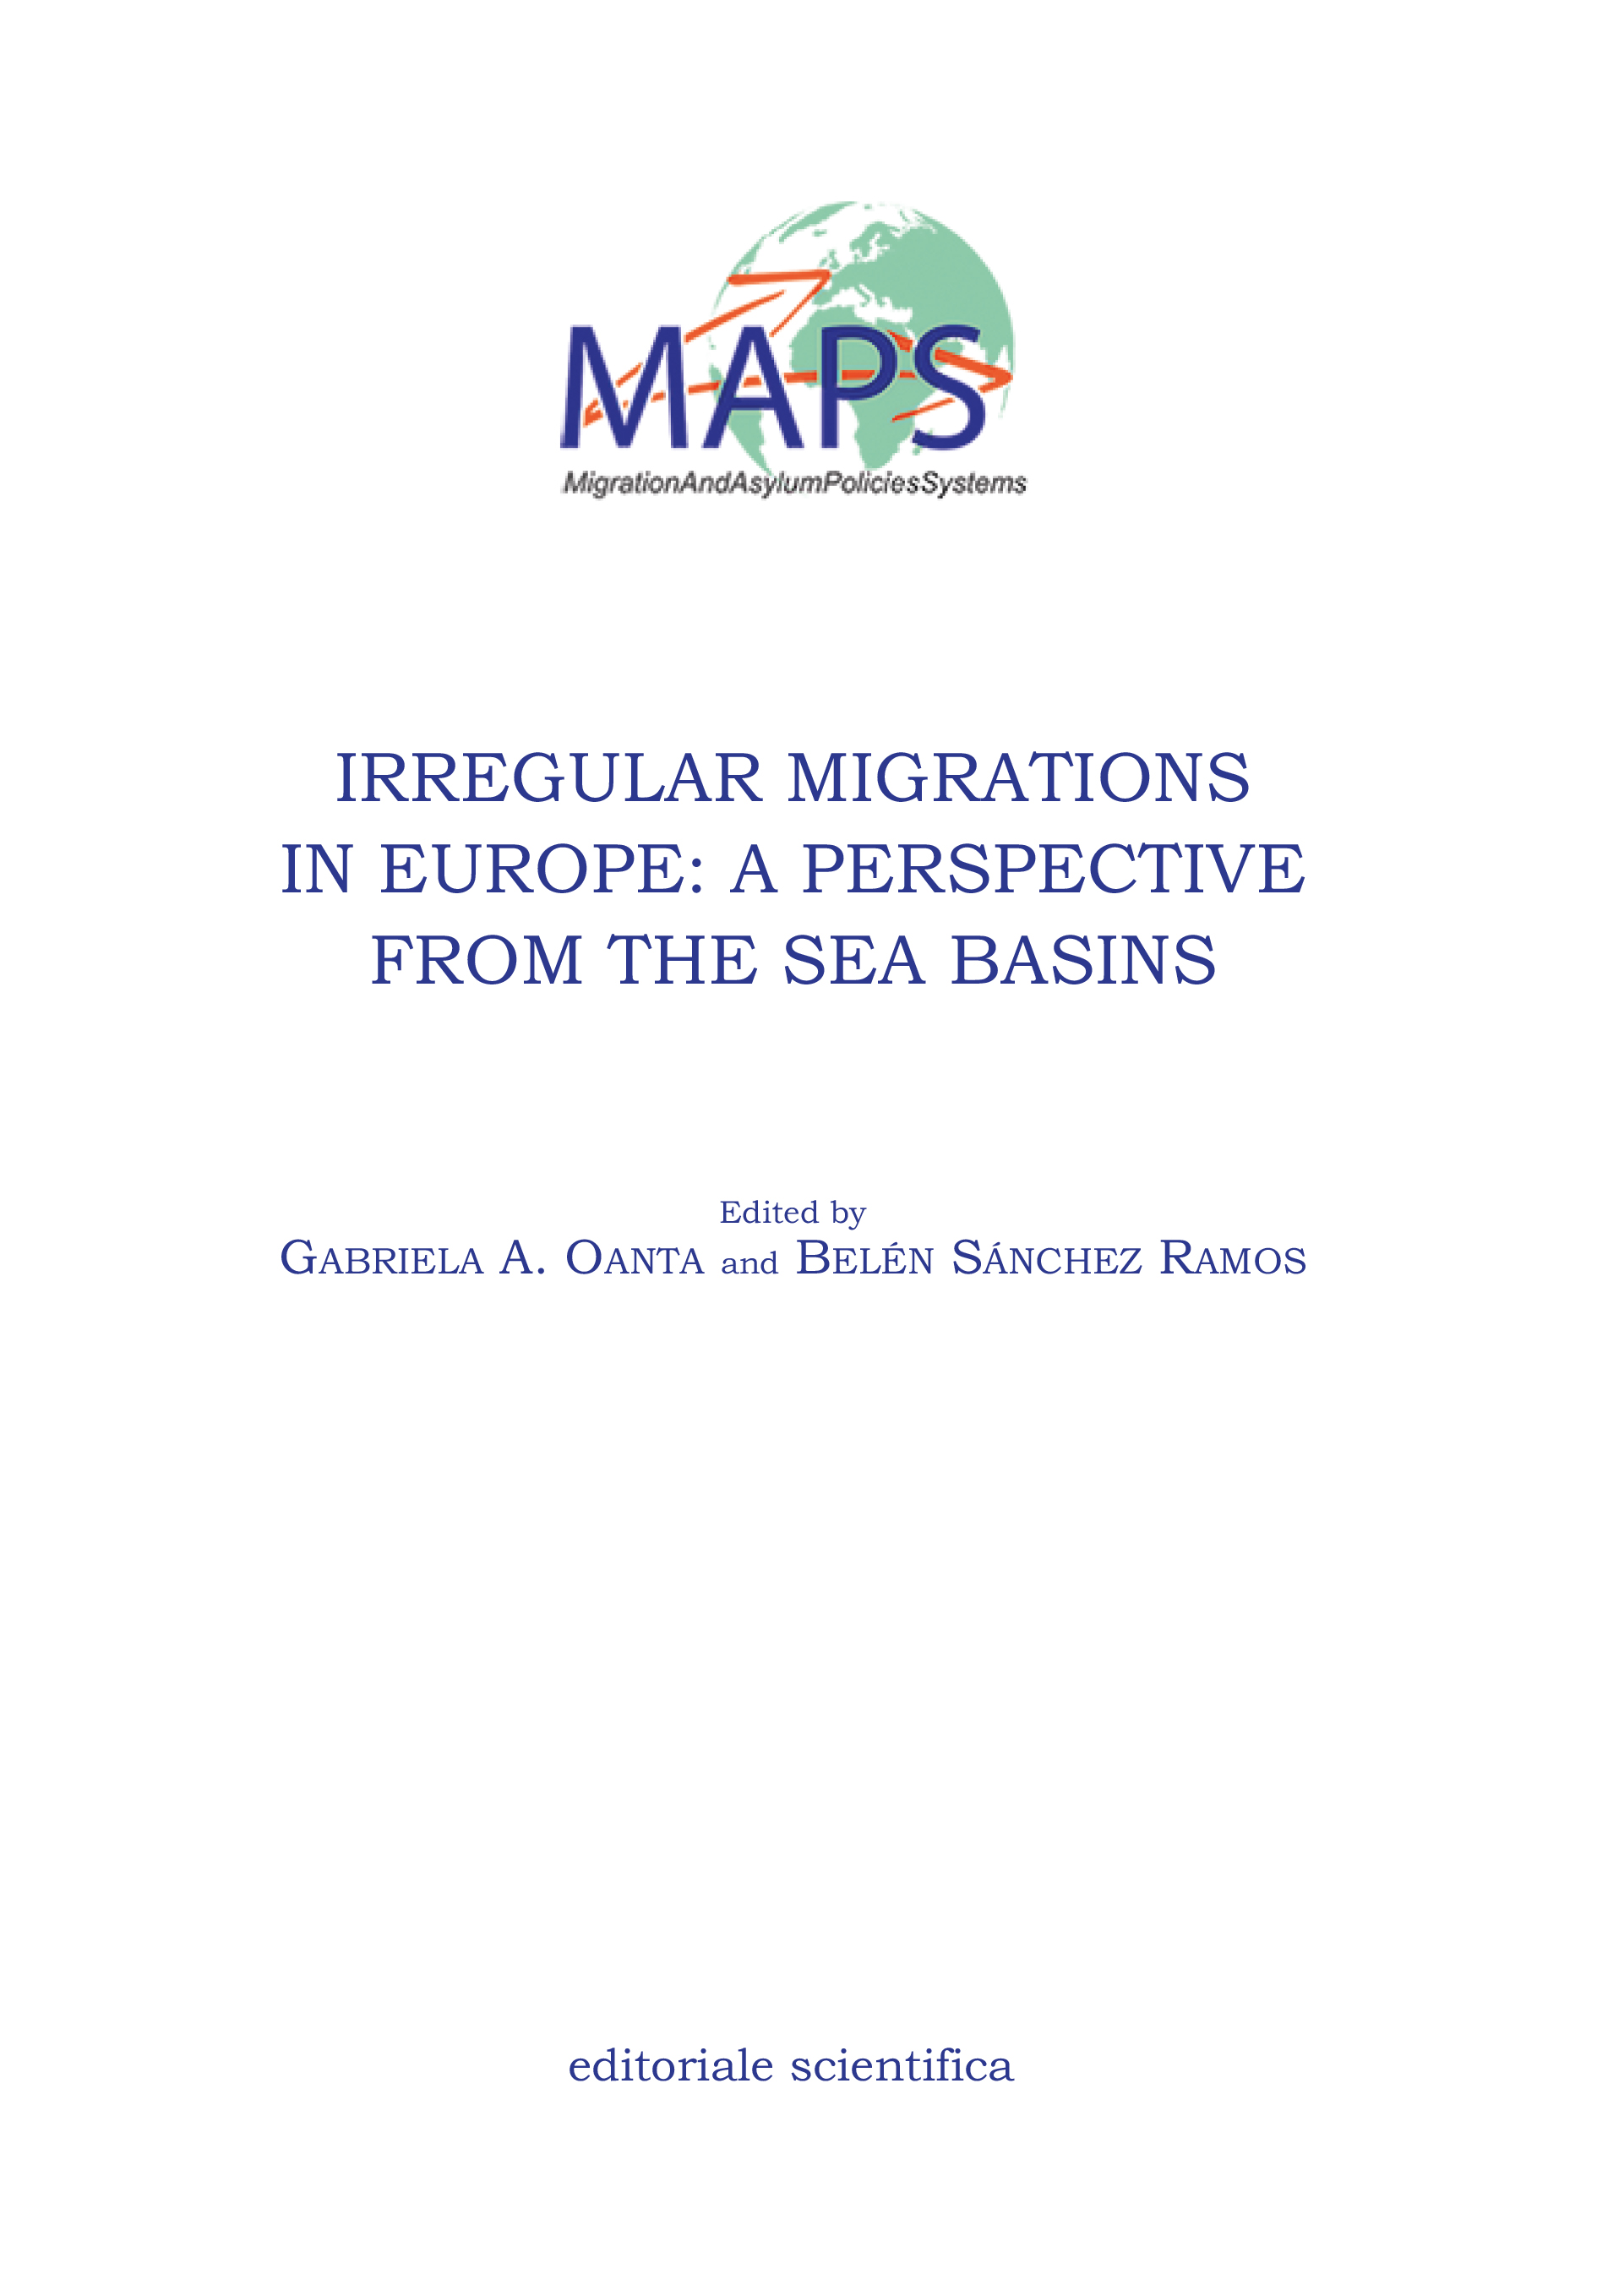 OANTA, G.A. and SÁNCHEZ RAMOS, B. (eds.), Irregular Migrations in Europe: A Perspective from the Sea Basins, Editoriale Scientifica, Naples, 2022, 362 pages